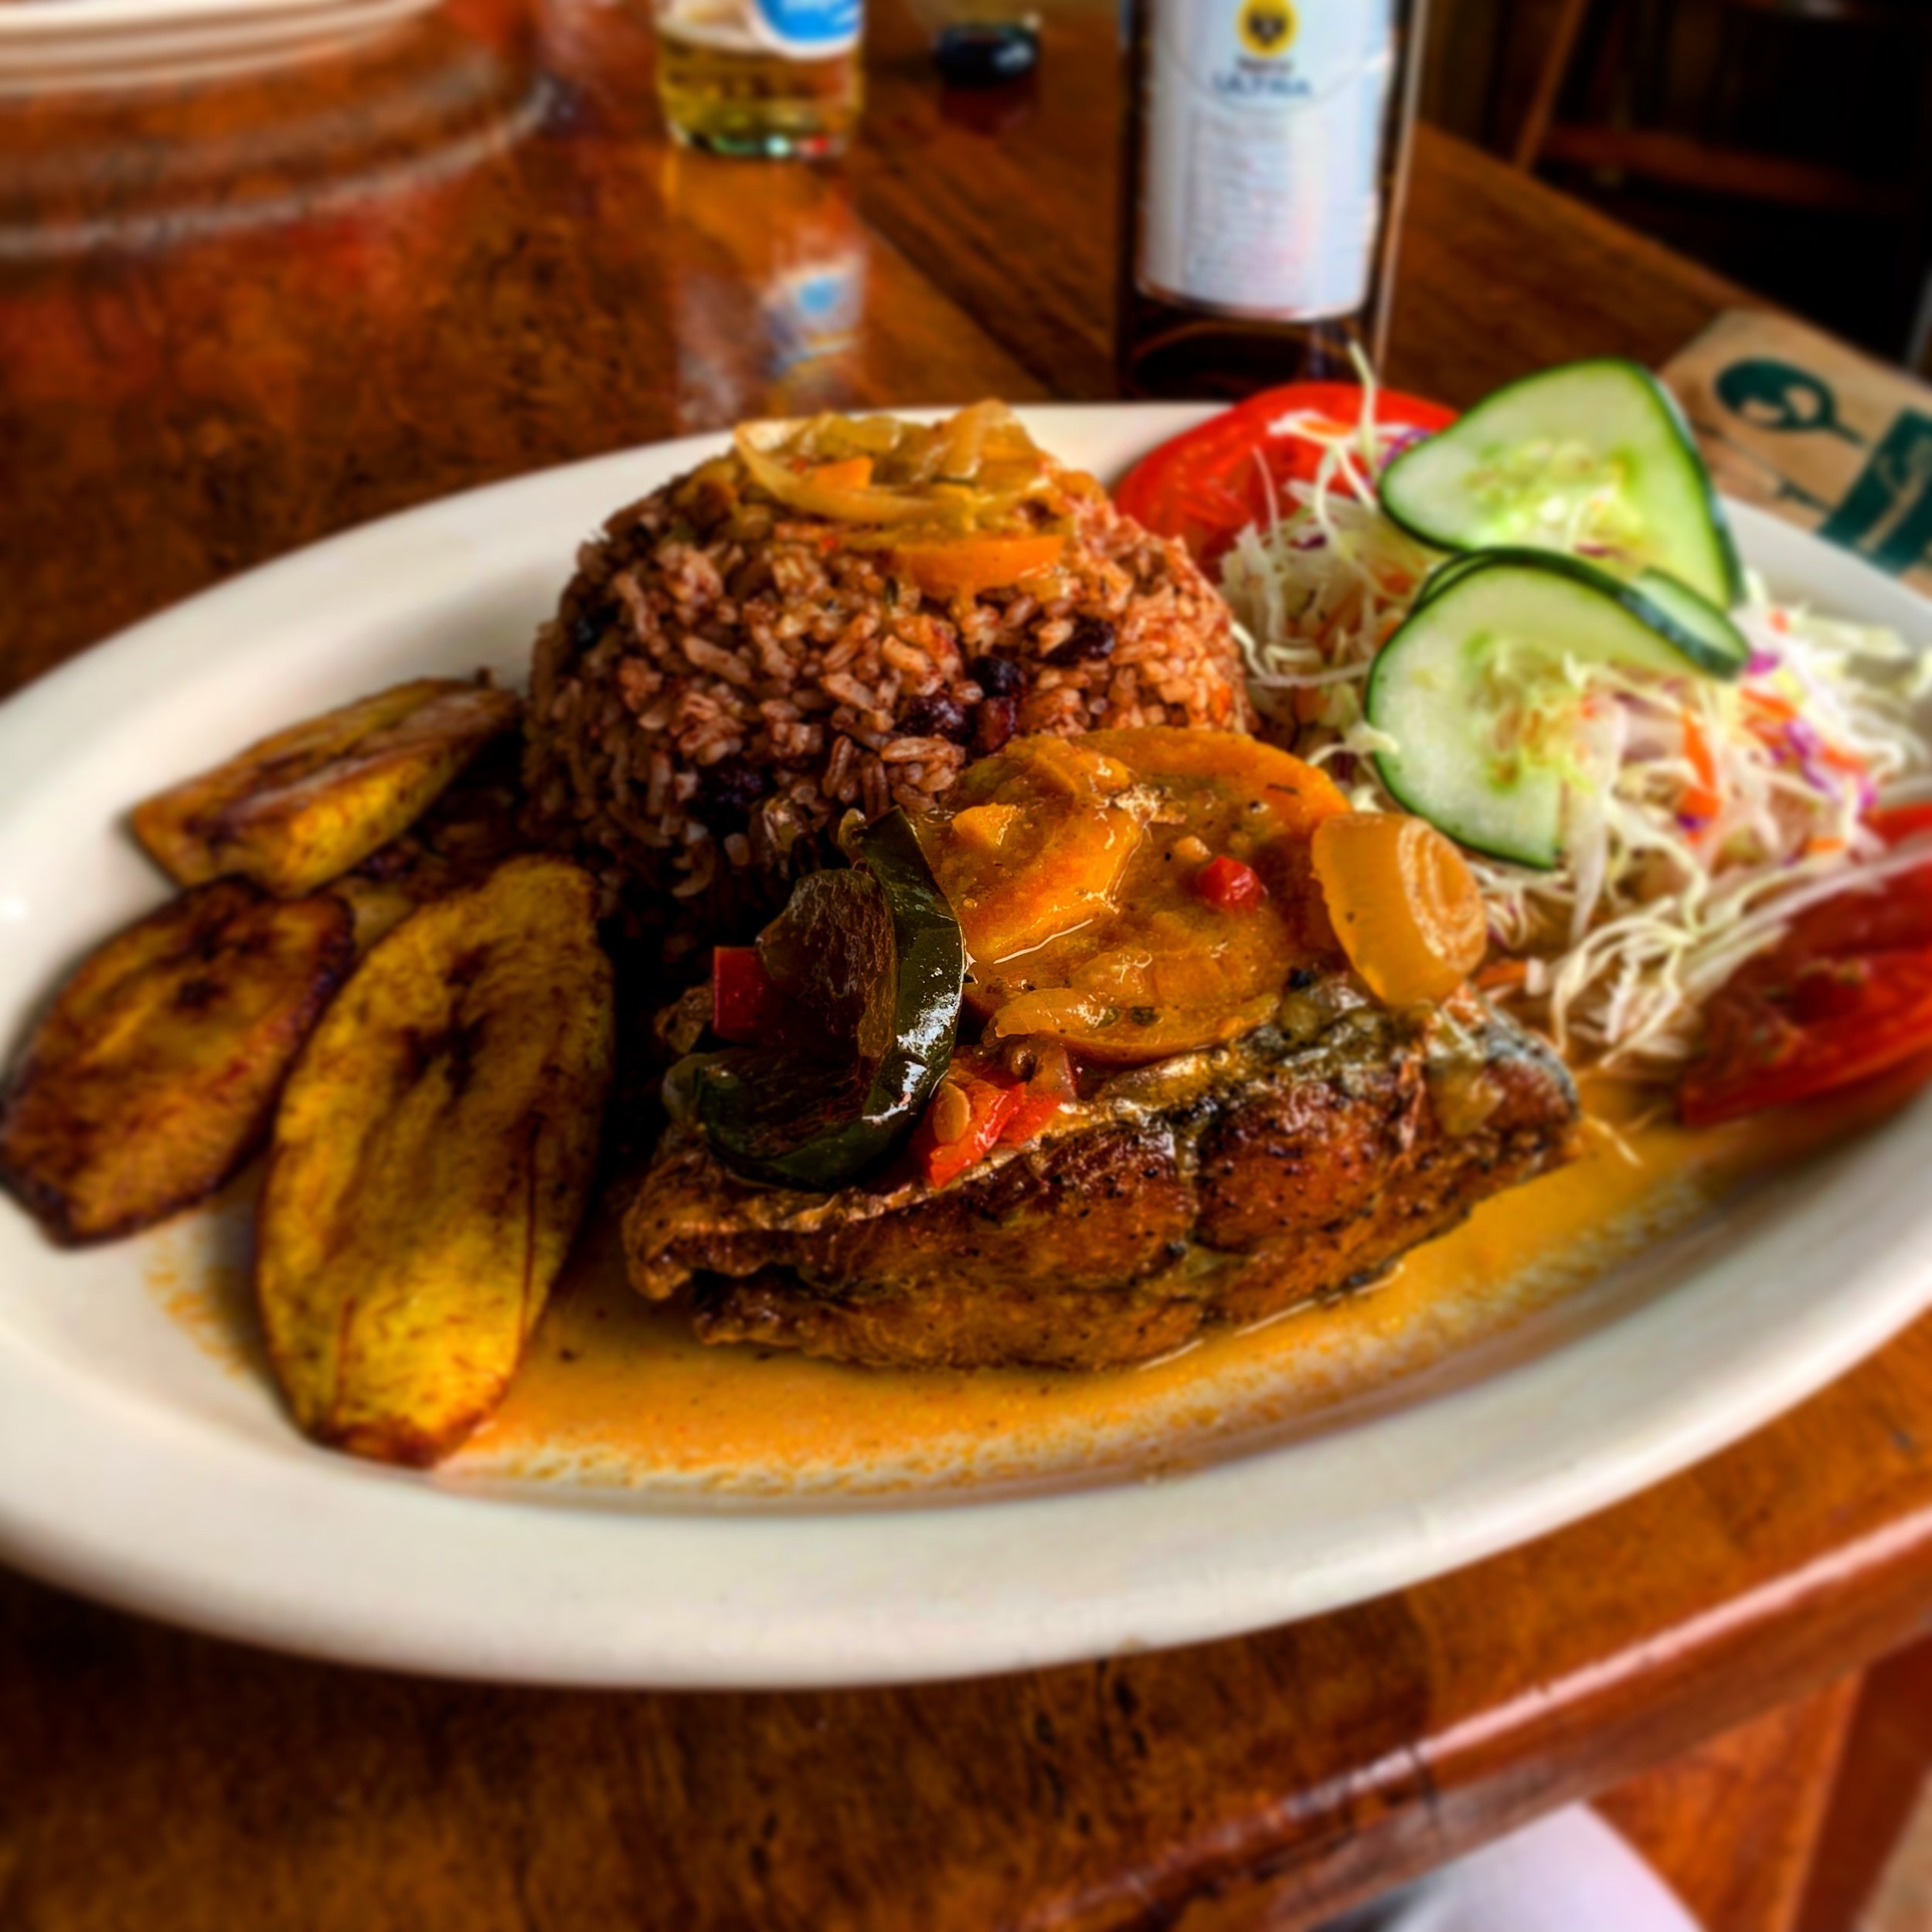  Caribbean-style rice & beans at Coco’s Restaurant & Bar in Cahuita, Limon, Costa Rica 